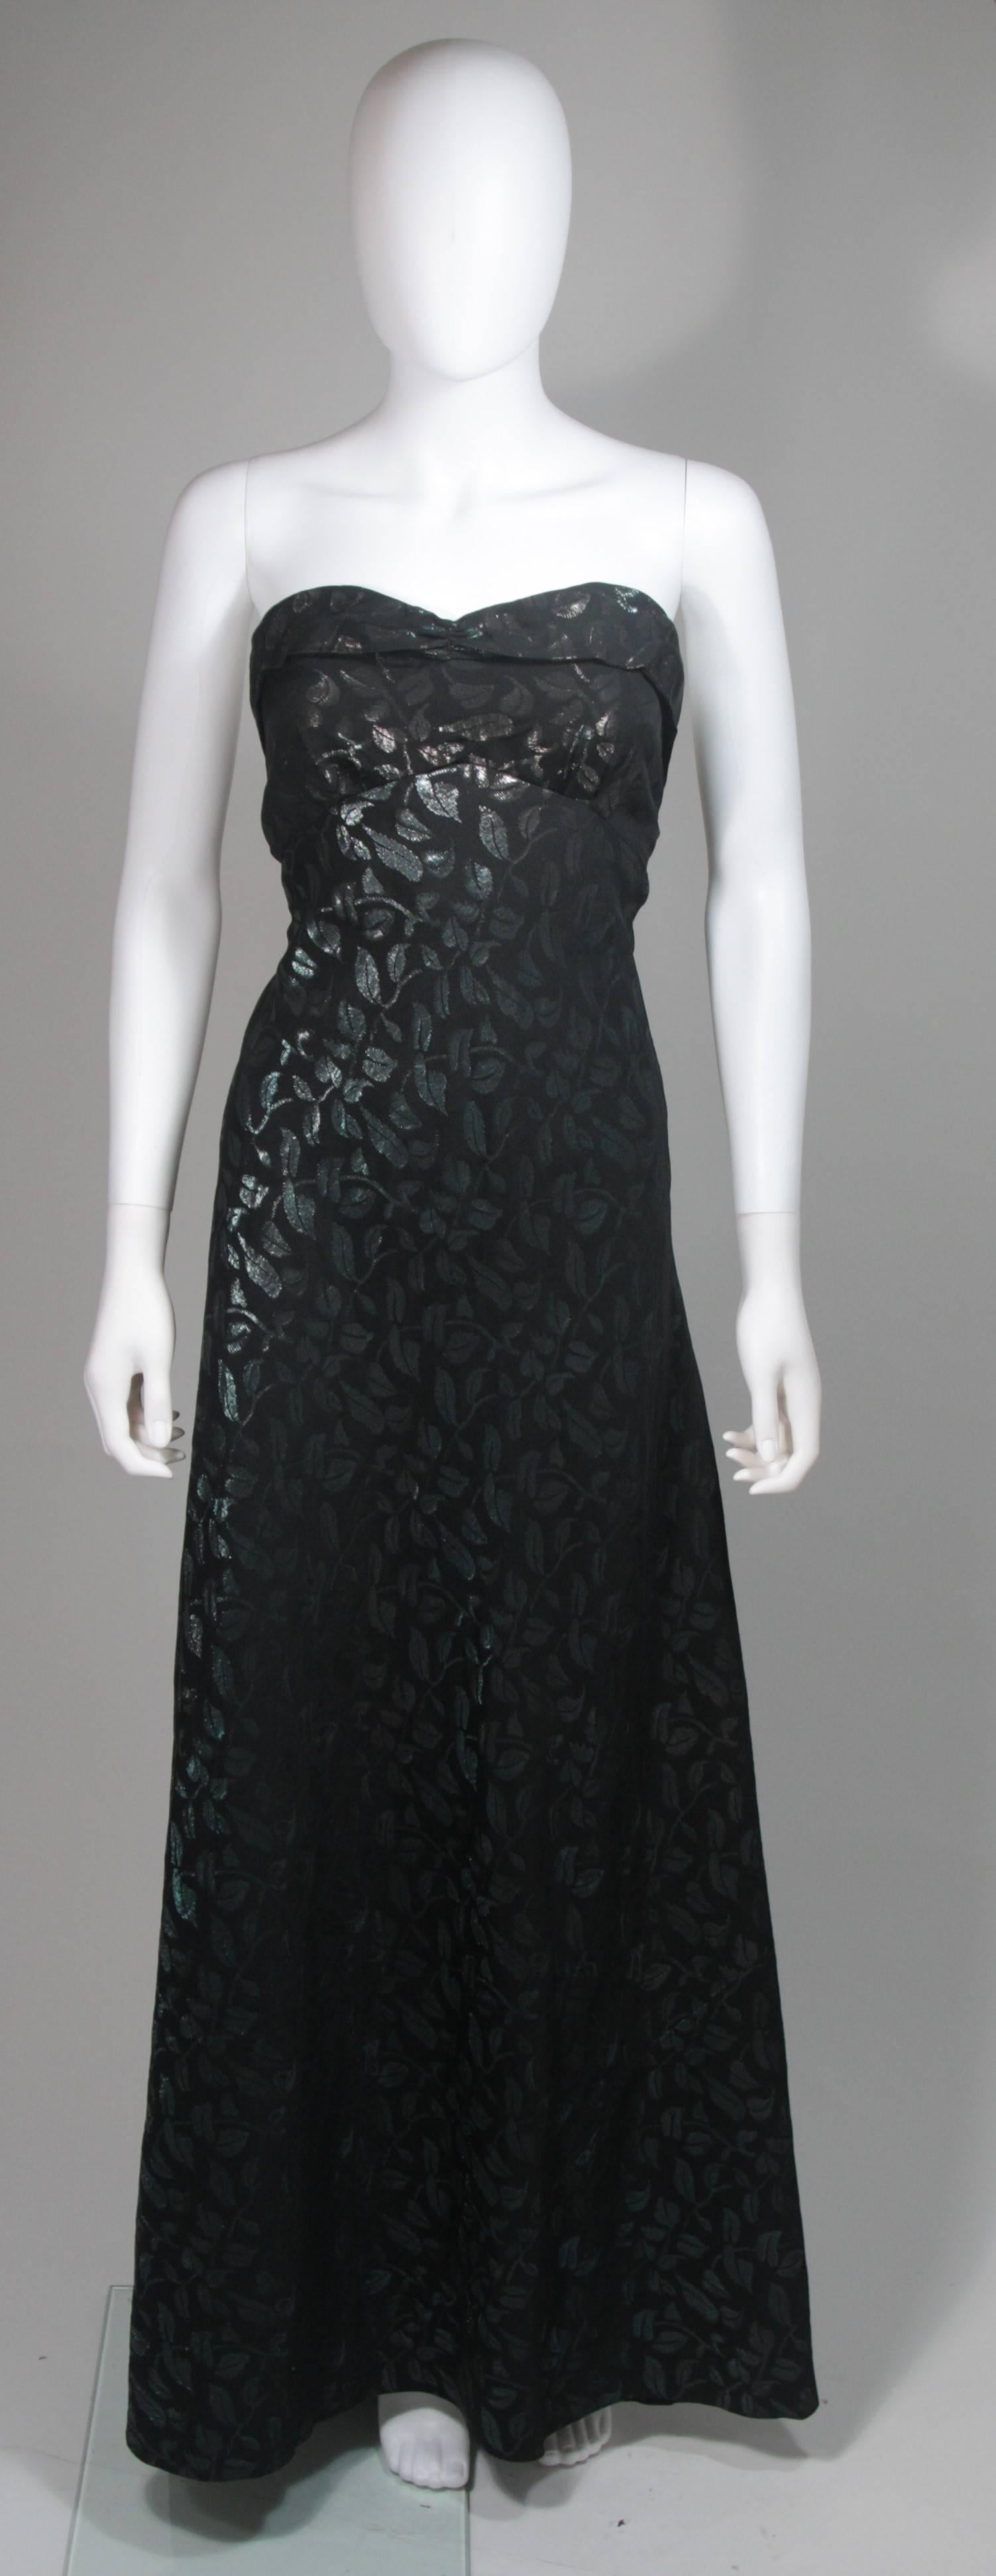 This vintage gown is composed of a black silk with a leaf motif in metallic hues of blue and green. The dress features a fitted bodice with flared skirt. There are center back button closures. In excellent vintage condition. 

**Please